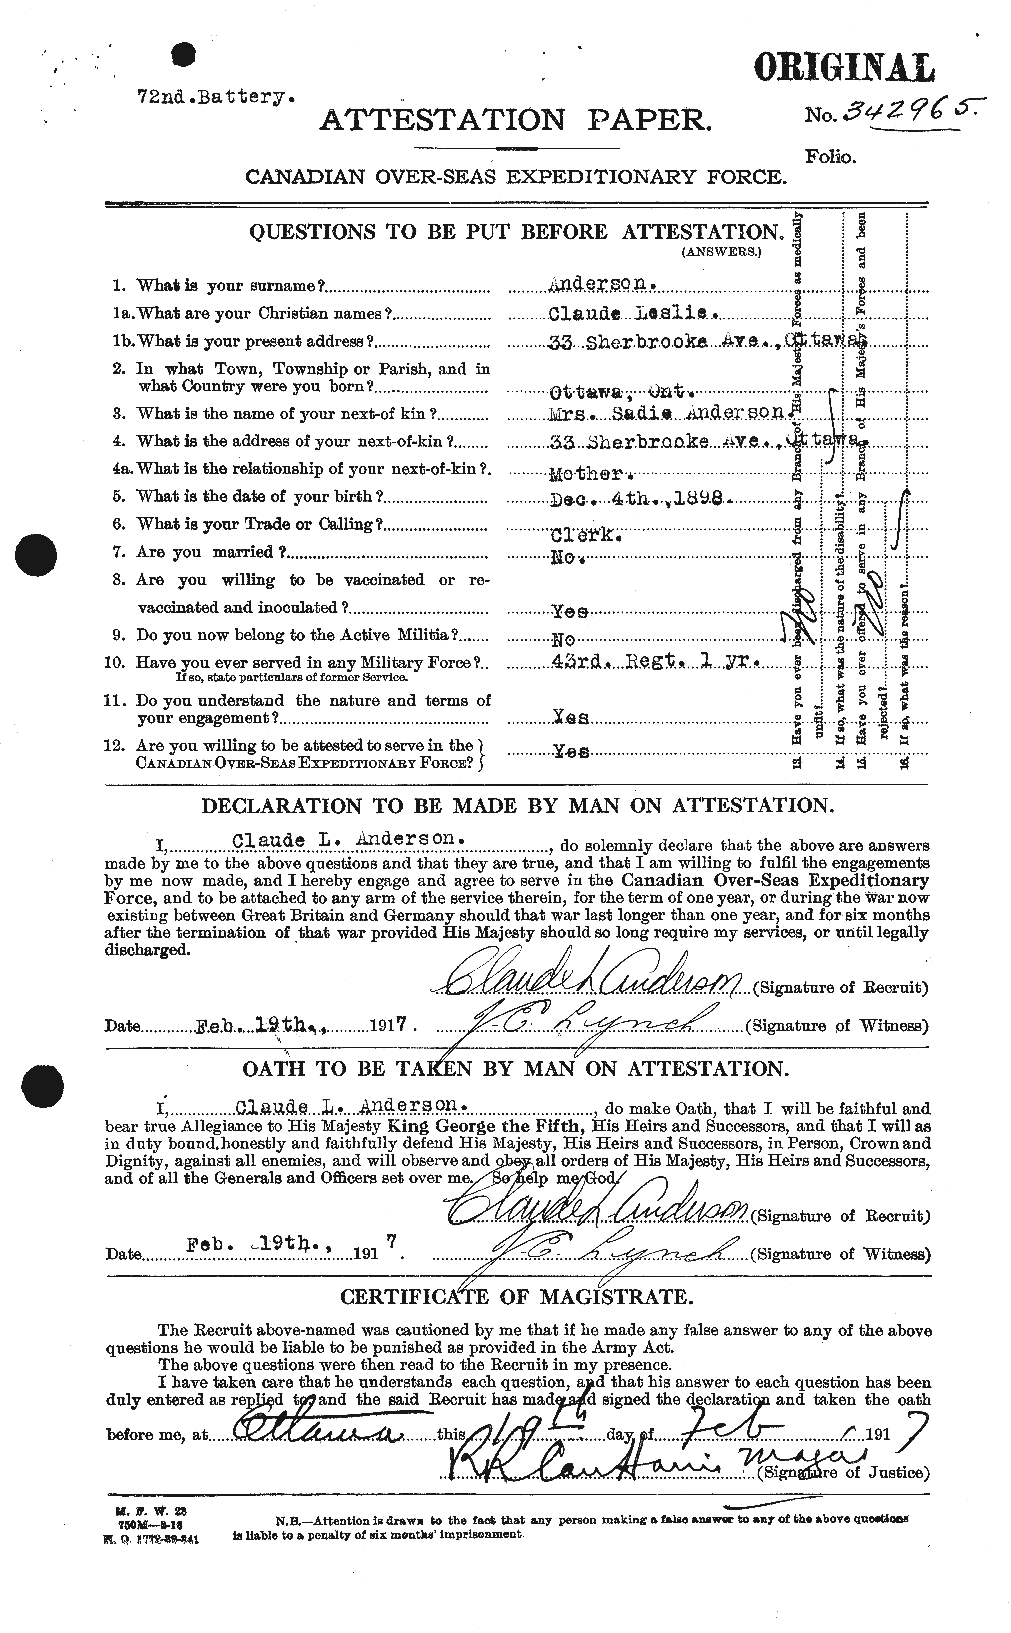 Personnel Records of the First World War - CEF 210068a